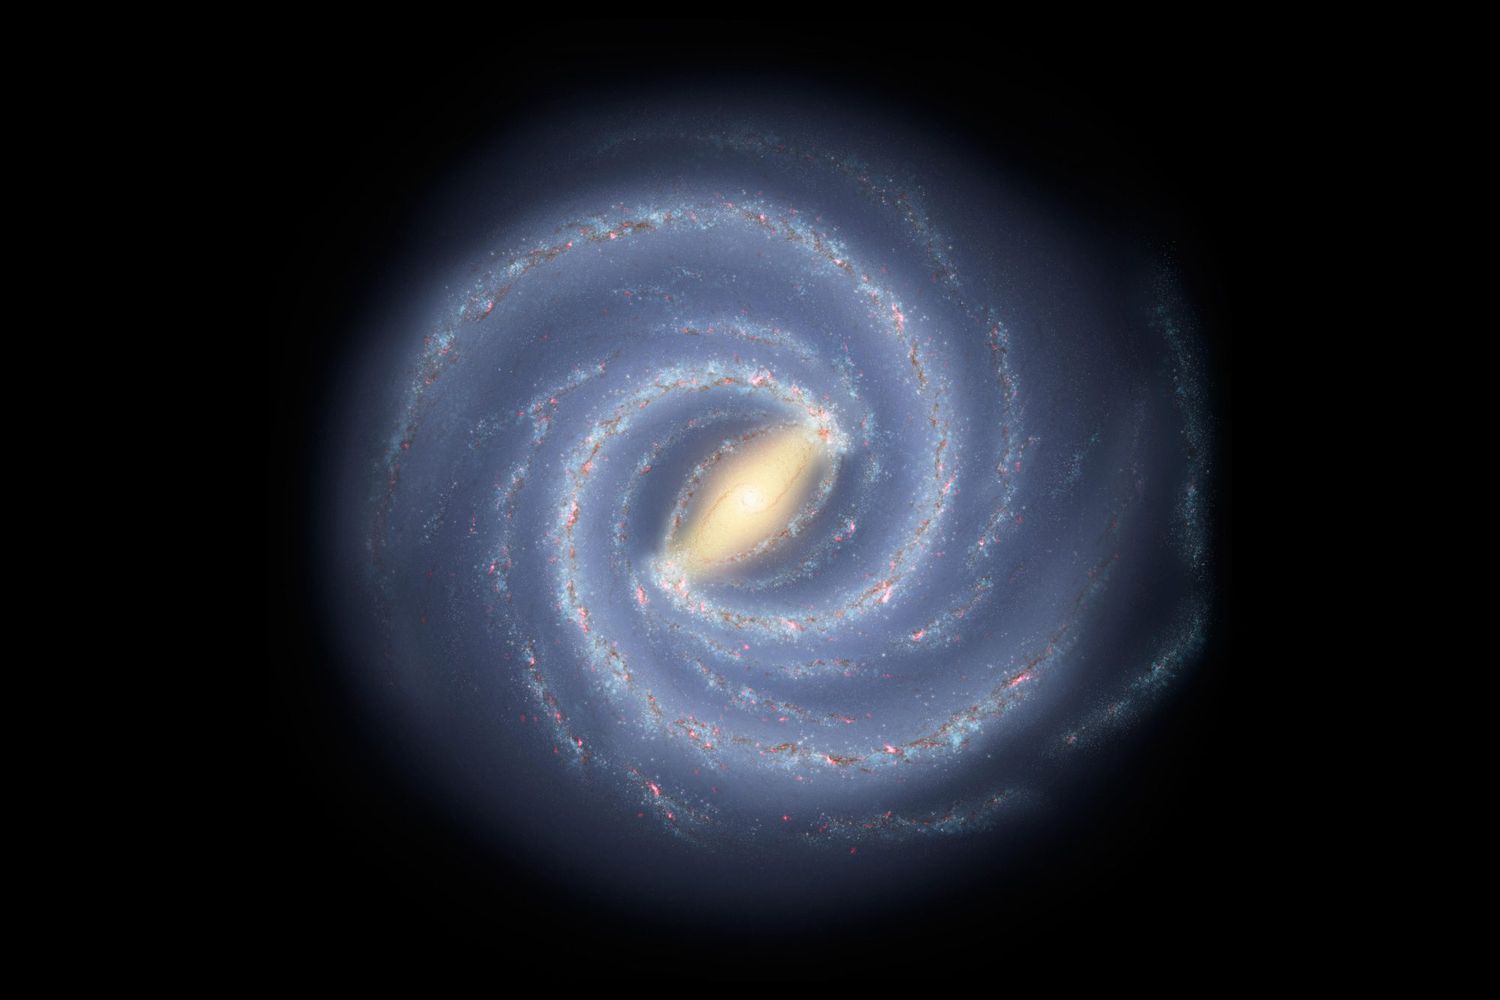 A Star Is Speeding Through the Milky Way at Nearly Two Million Miles an Hour - Yahoo Lifestyle